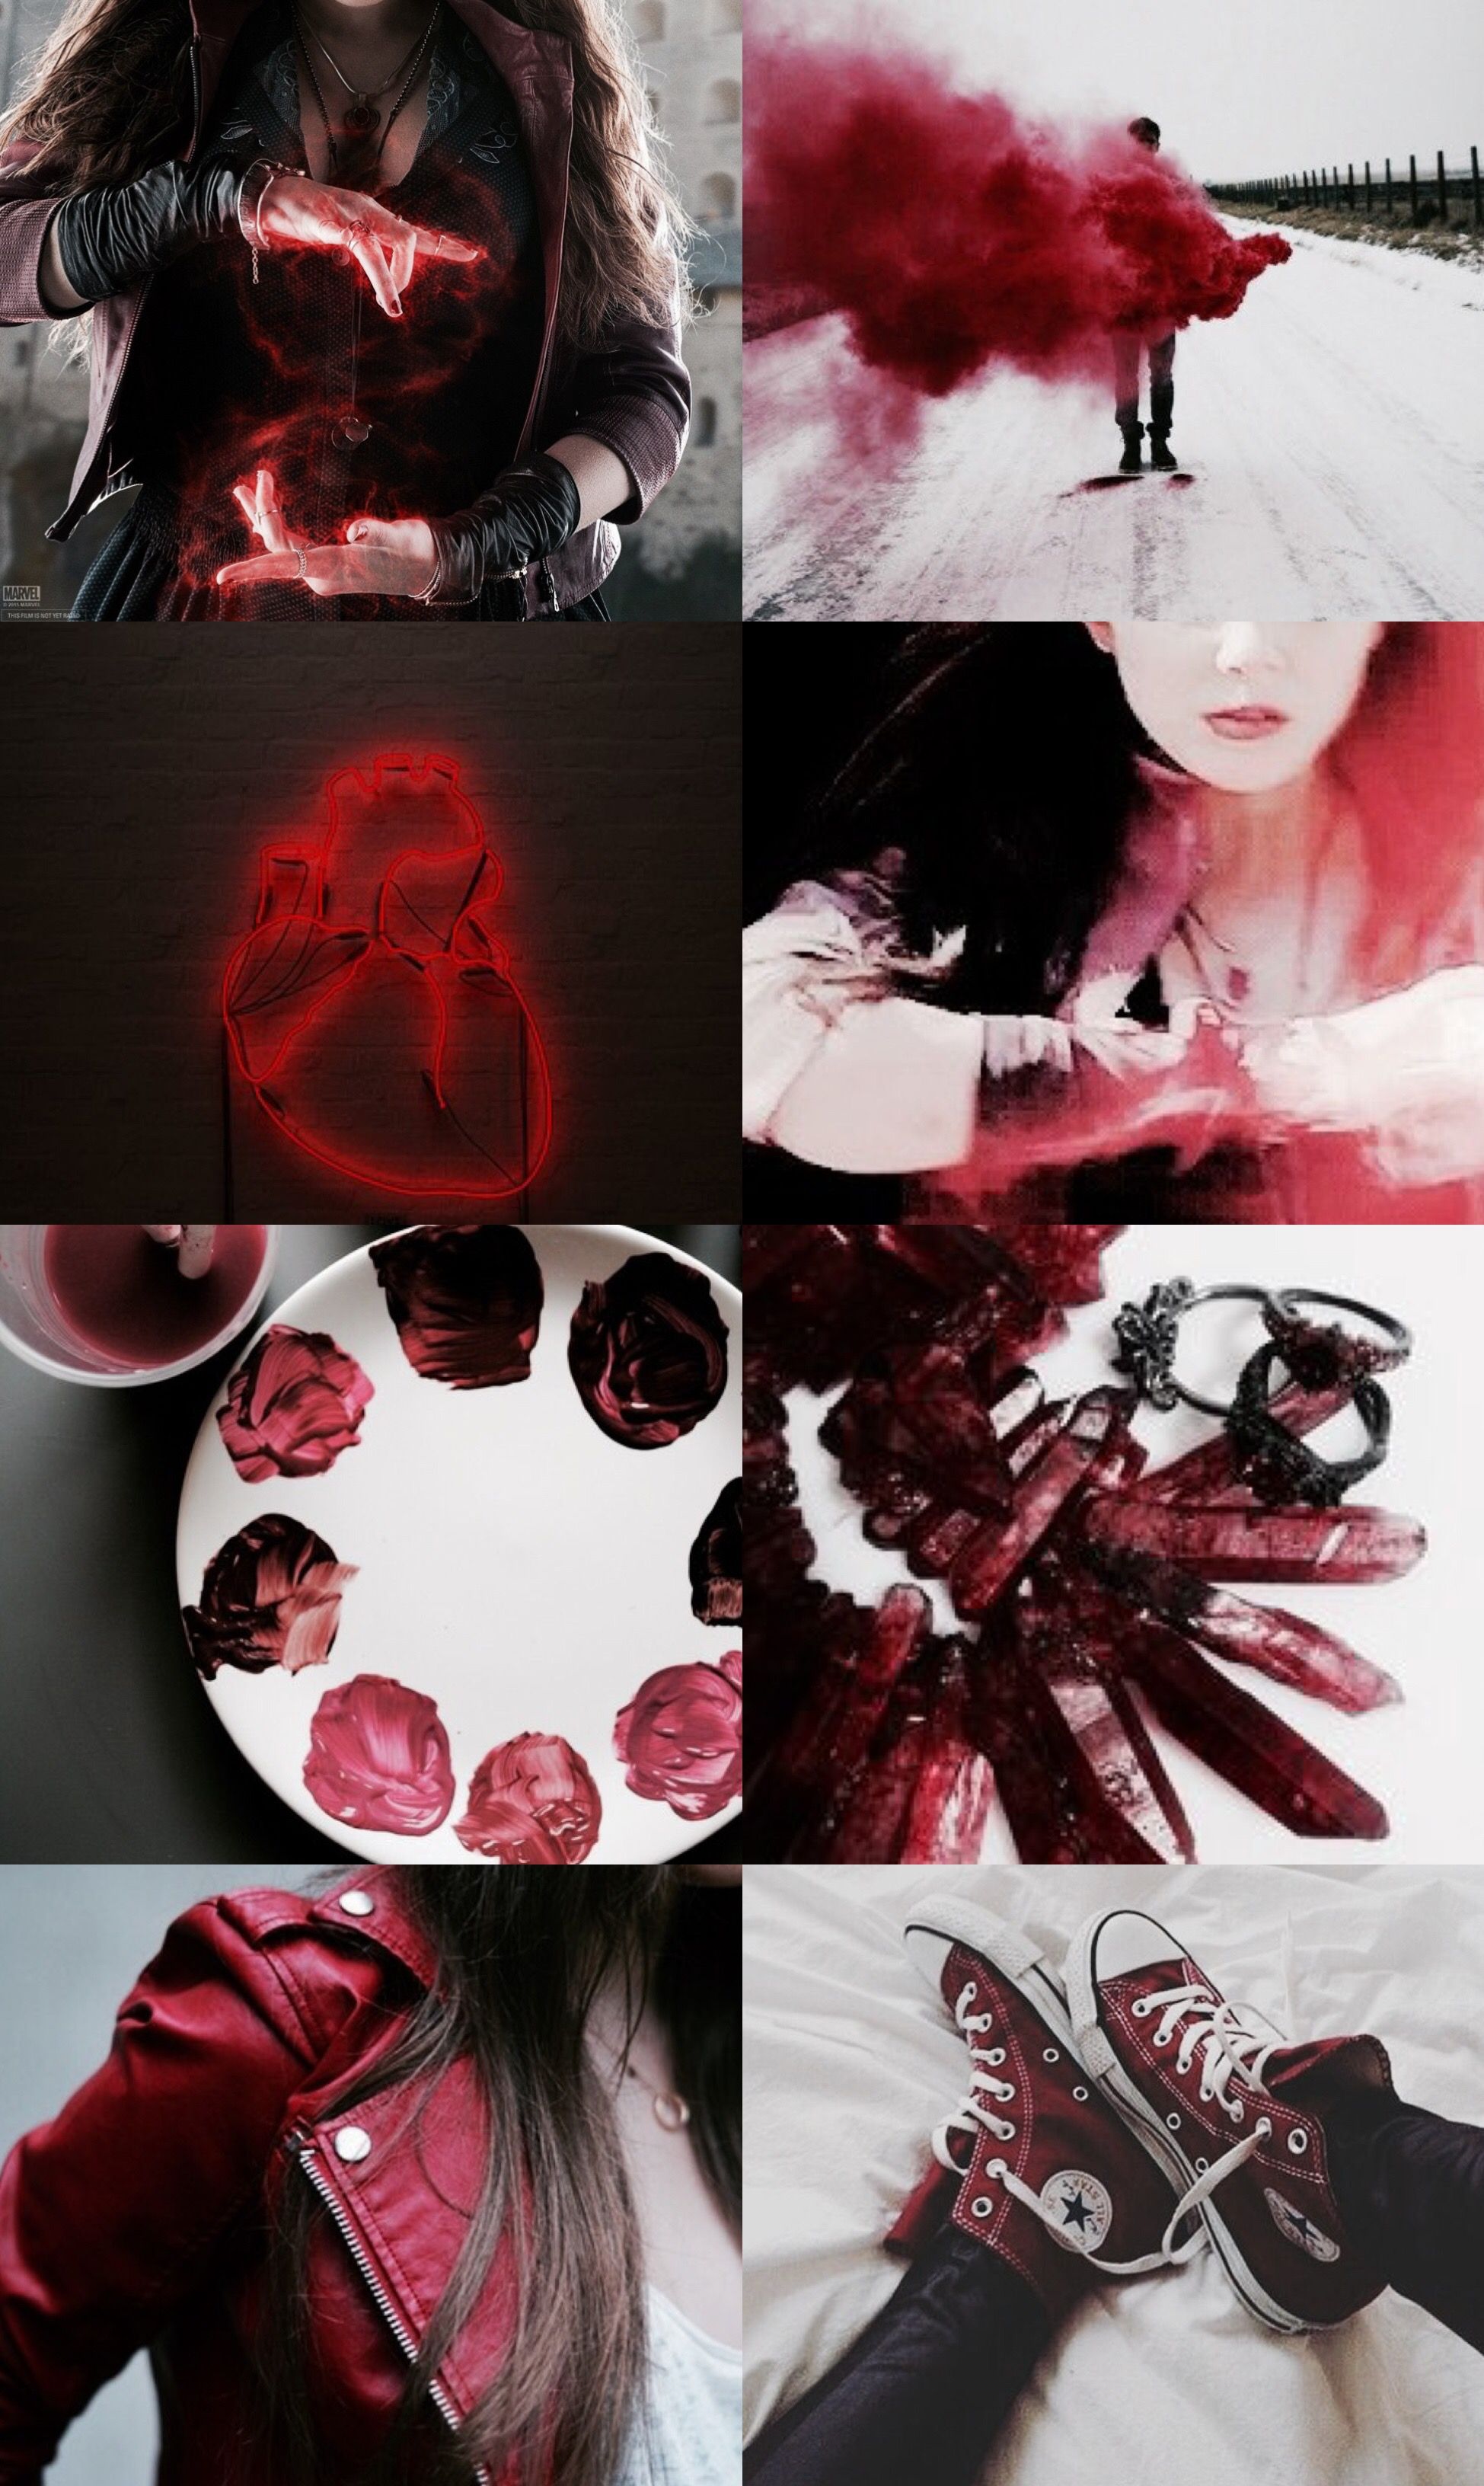 ☮ * ° ♥ ˚ℒℴѵℯ cjf. Witch aesthetic, Scarlett witch, Aesthetic wallpaper